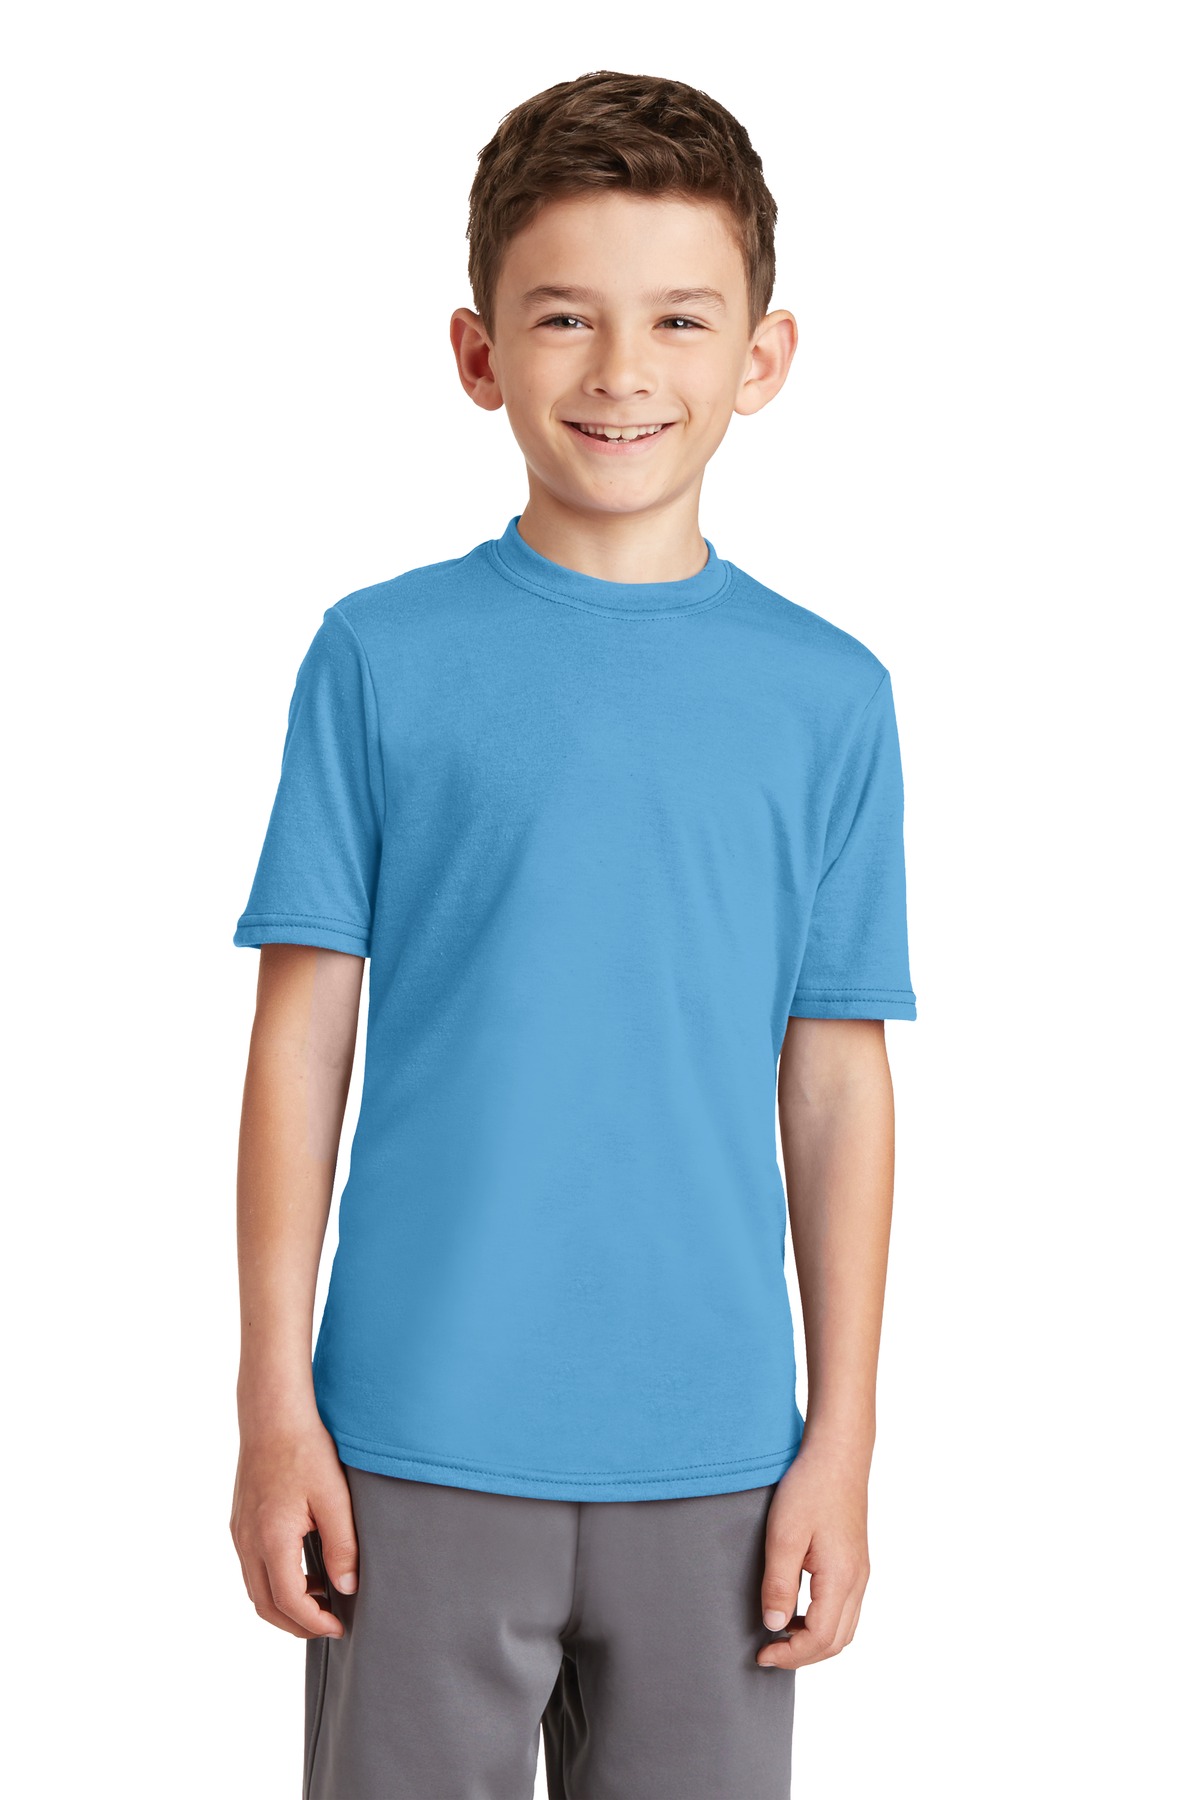 Port & Company Youth Performance Blend T-Shirt - PC381Y